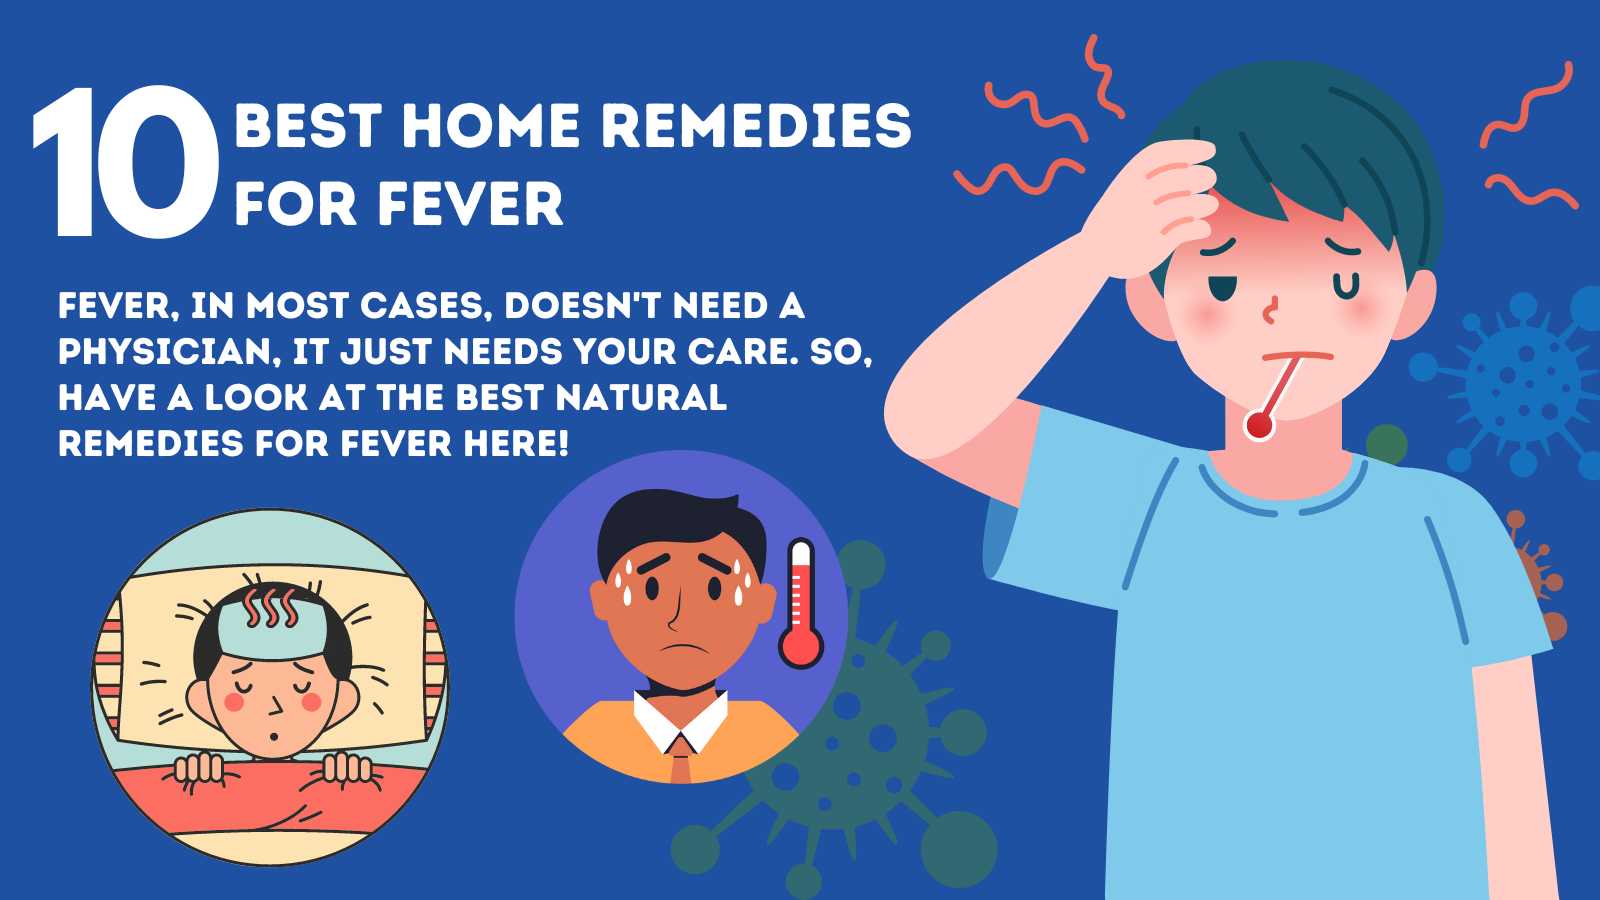 Best Home Remedies for Fever